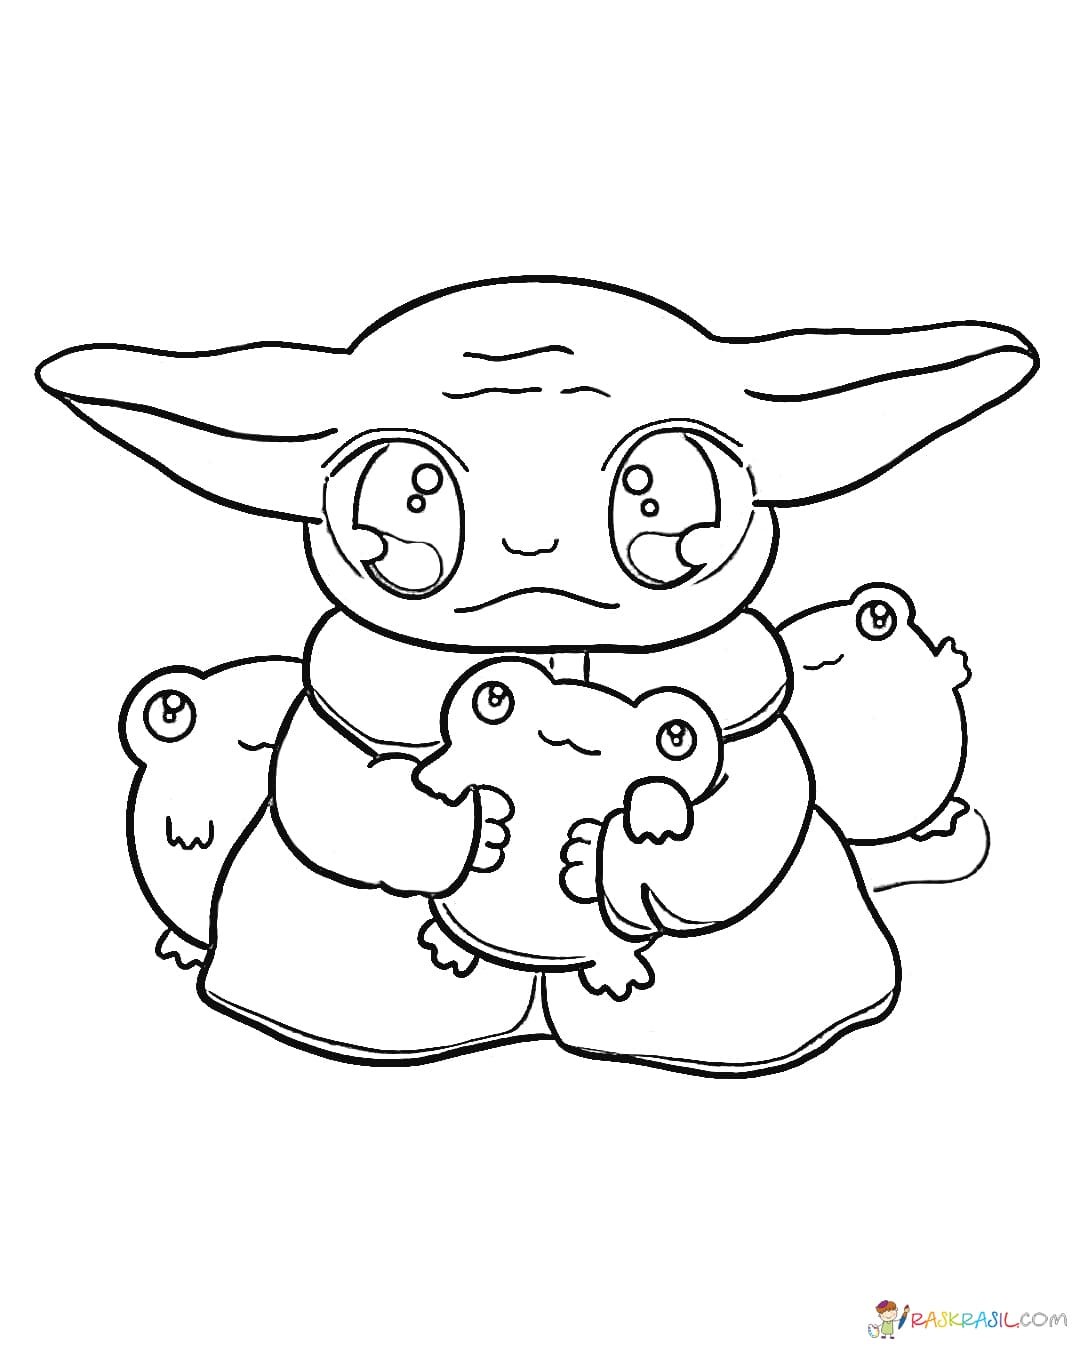 coloring : Toothless Coloring Pages New Coloring Pages Baby Yoda ...